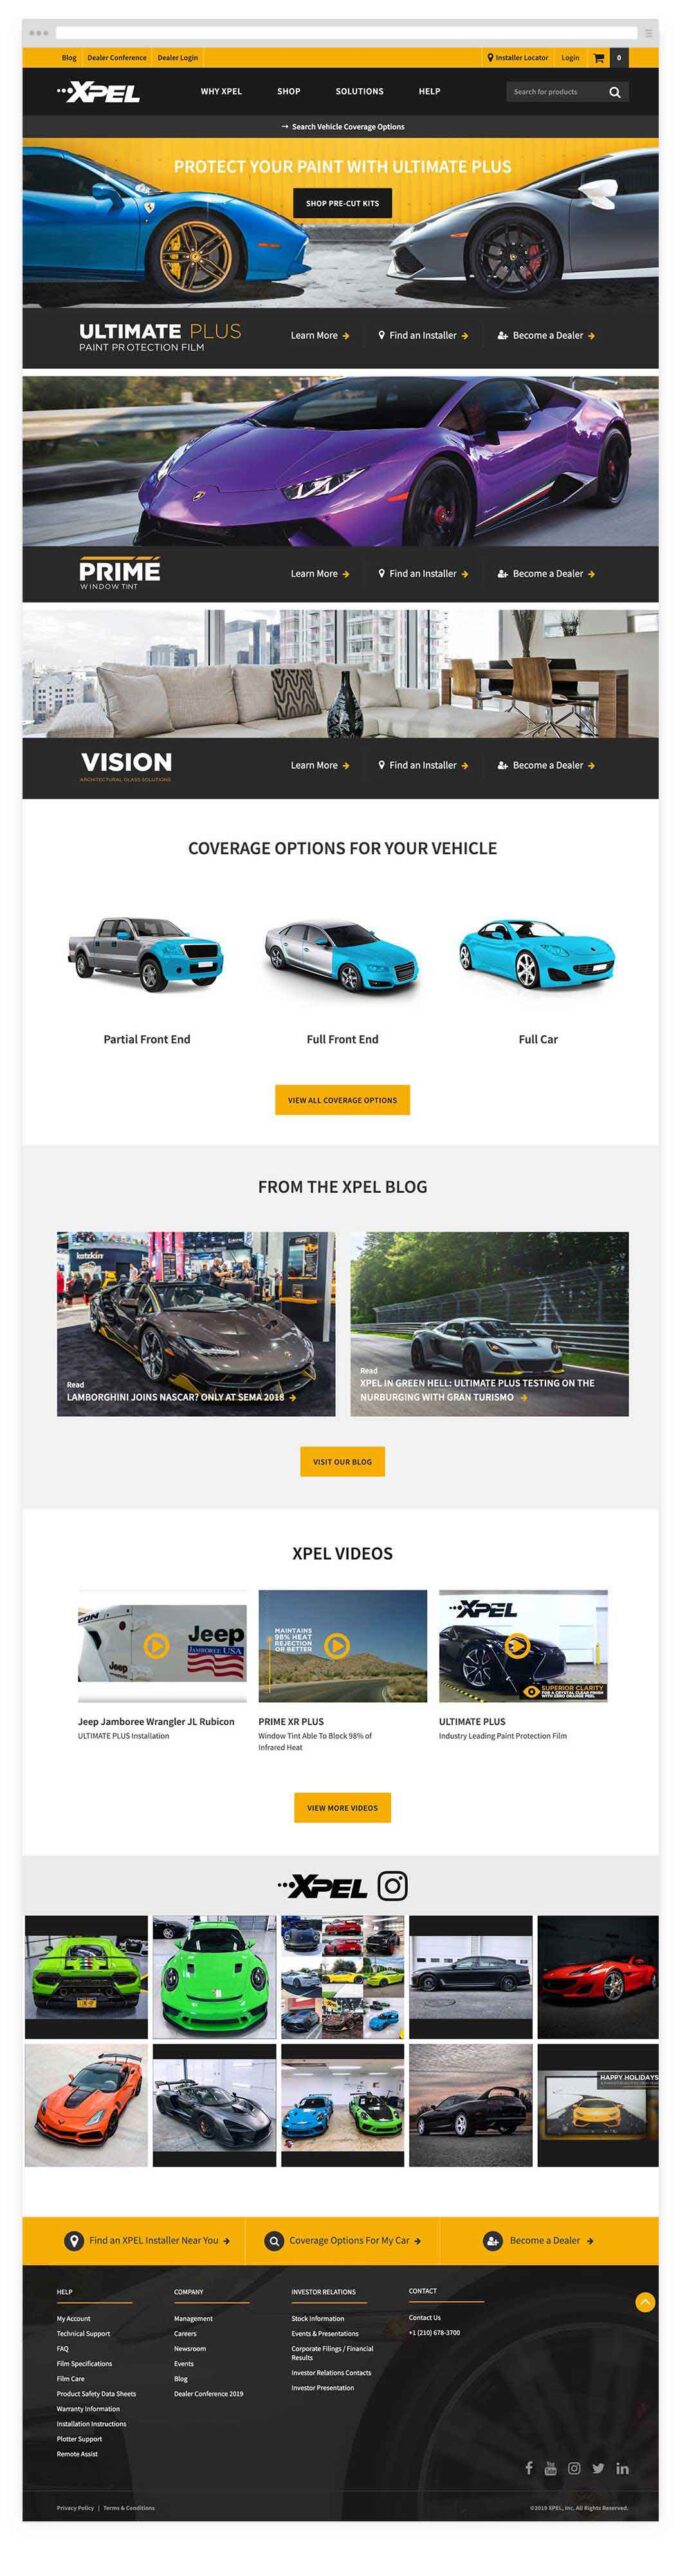 XPEL SuiteCommerce home page